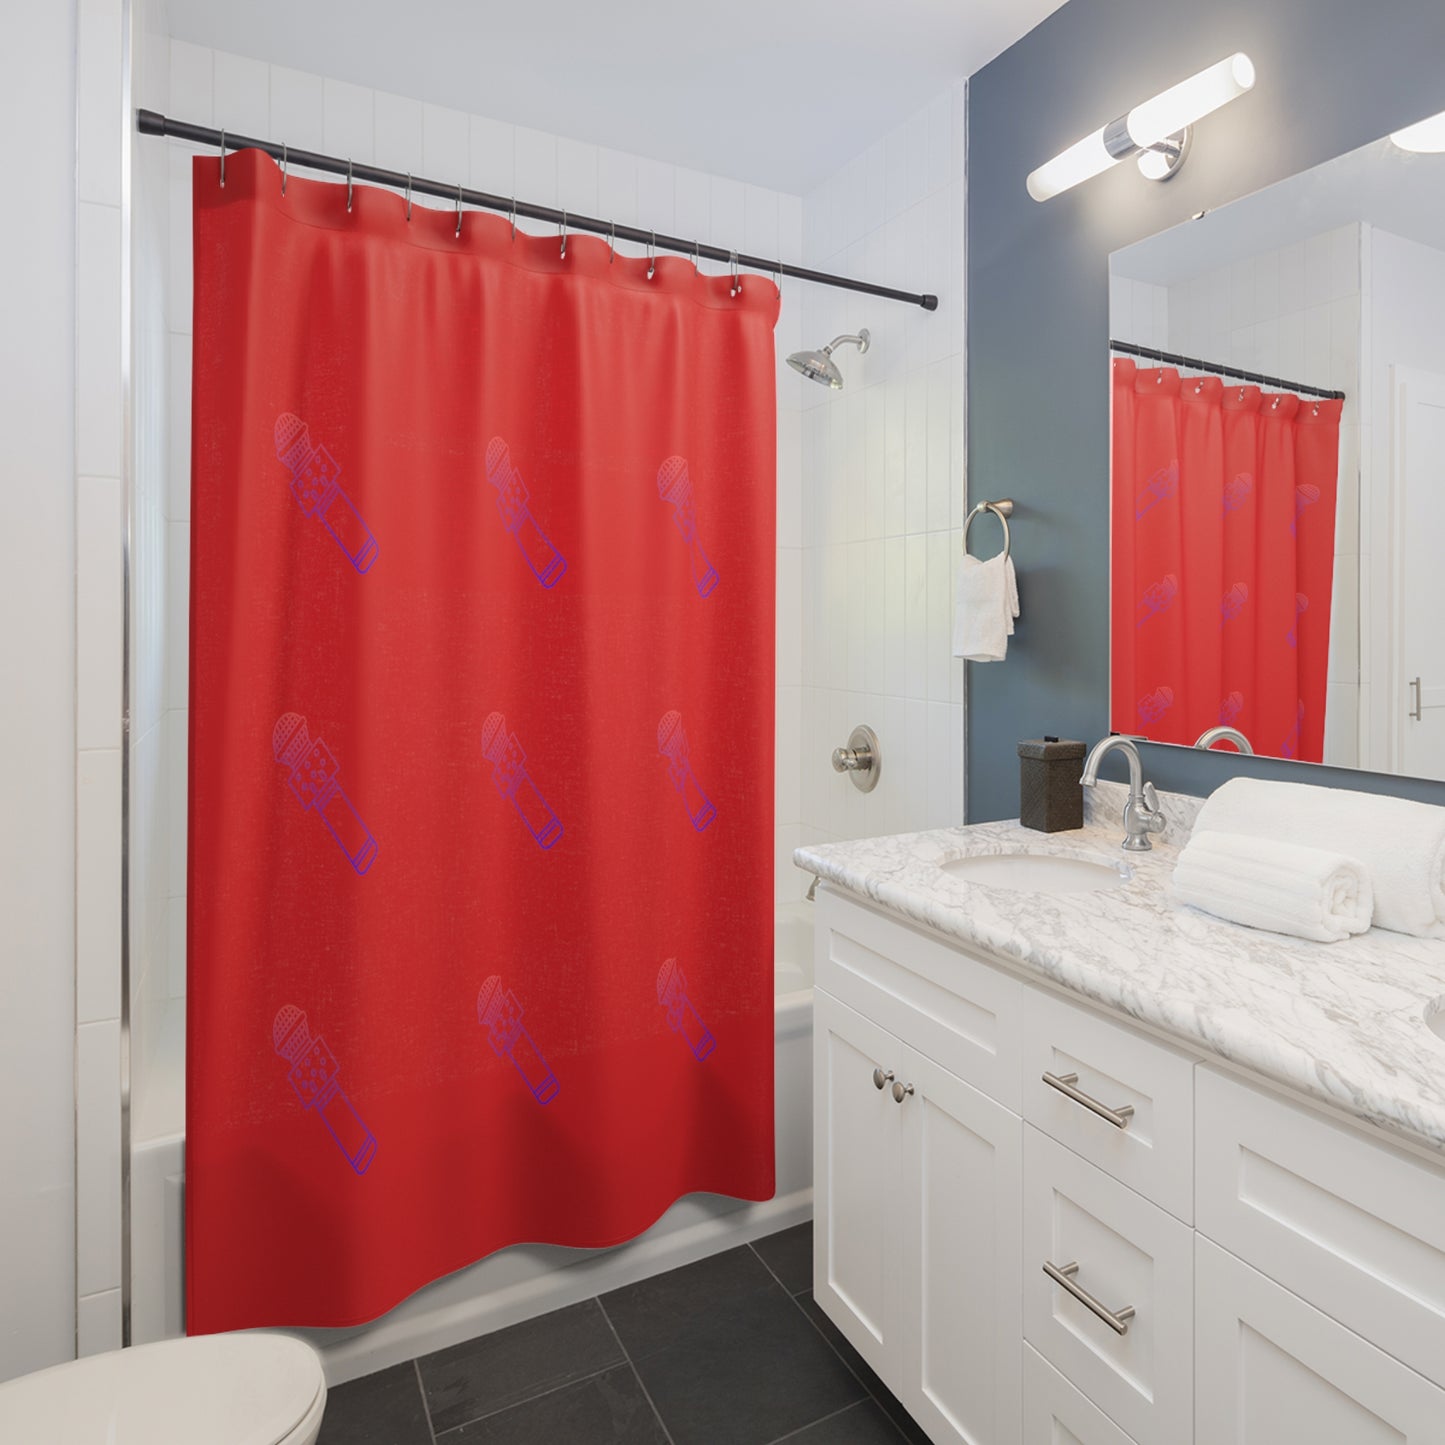 Shower Curtains: #2 Music Red